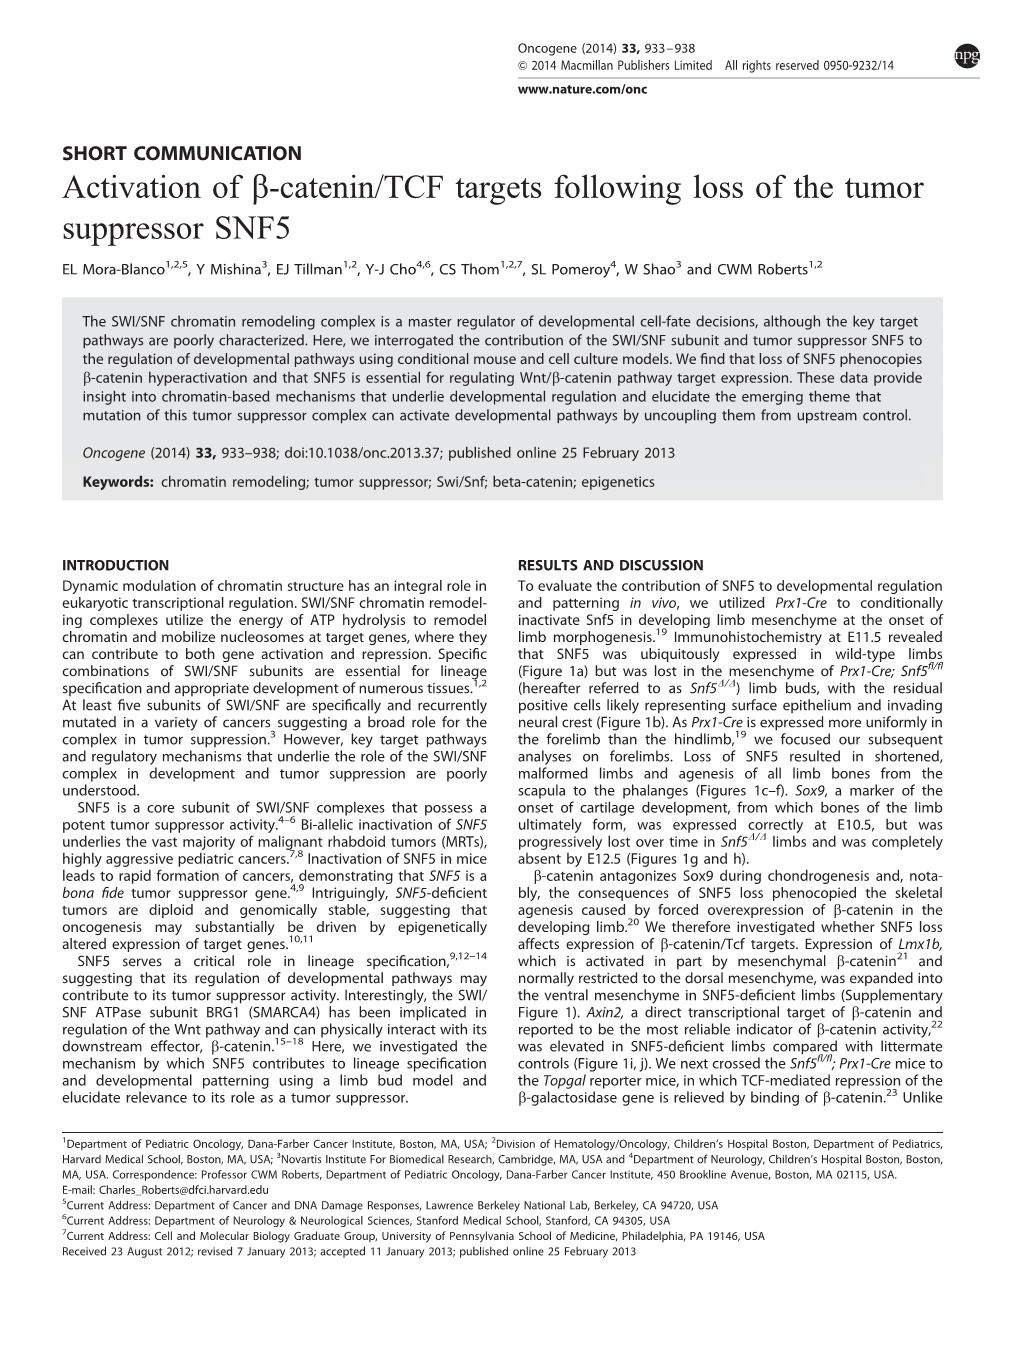 TCF Targets Following Loss of the Tumor Suppressor SNF5